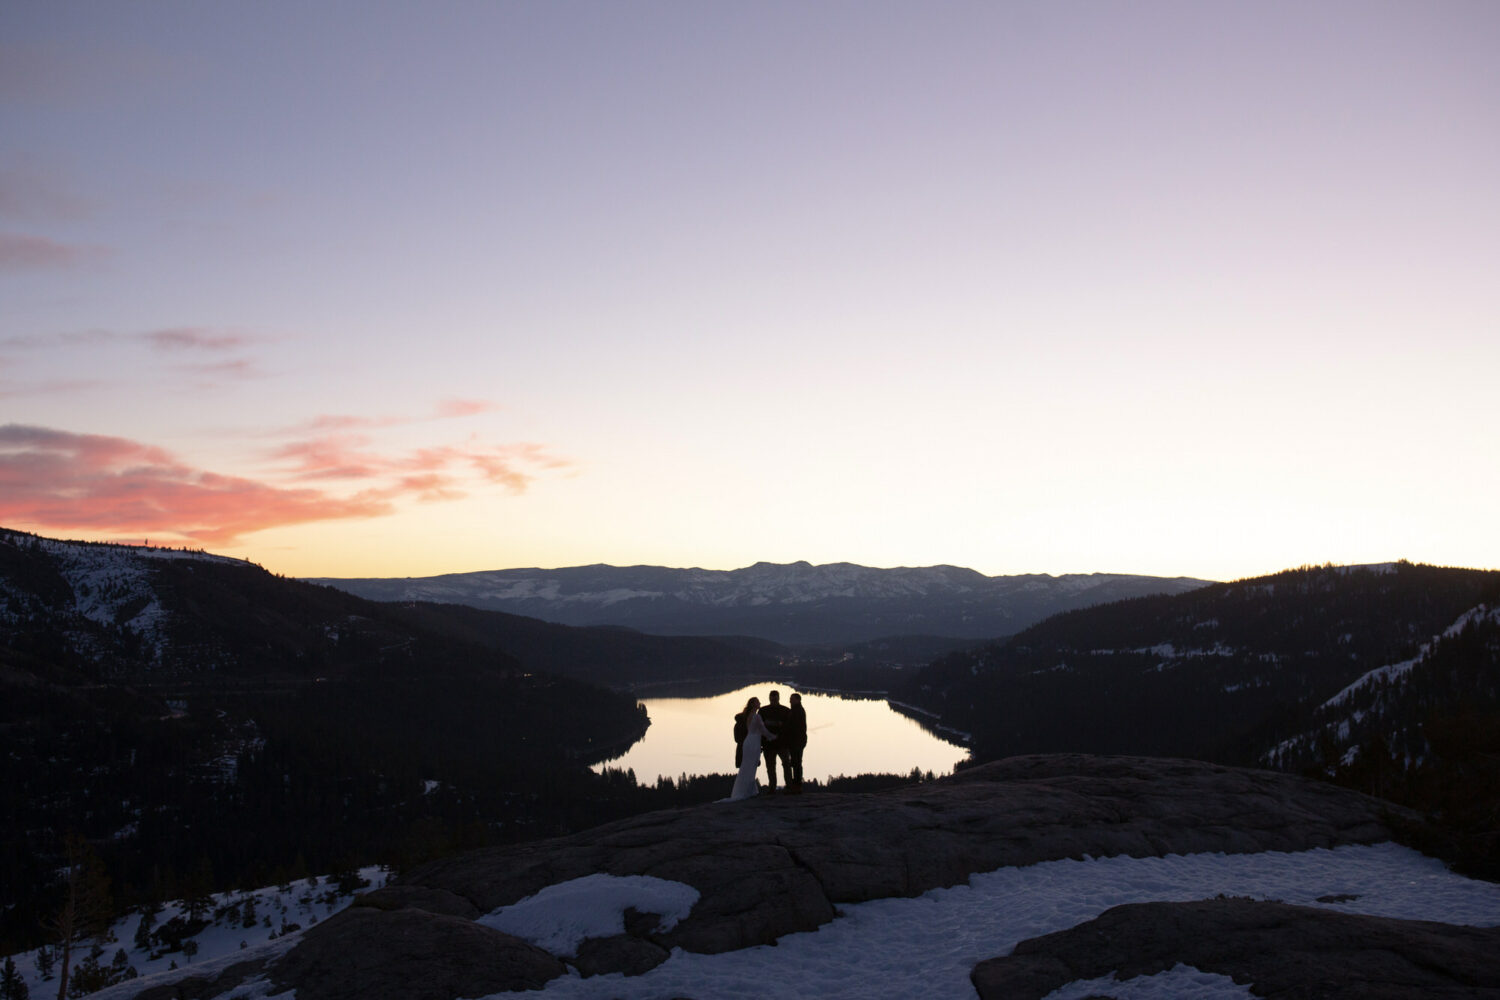 Lake Tahoe elopement at dawn with Truckee visible in the background.